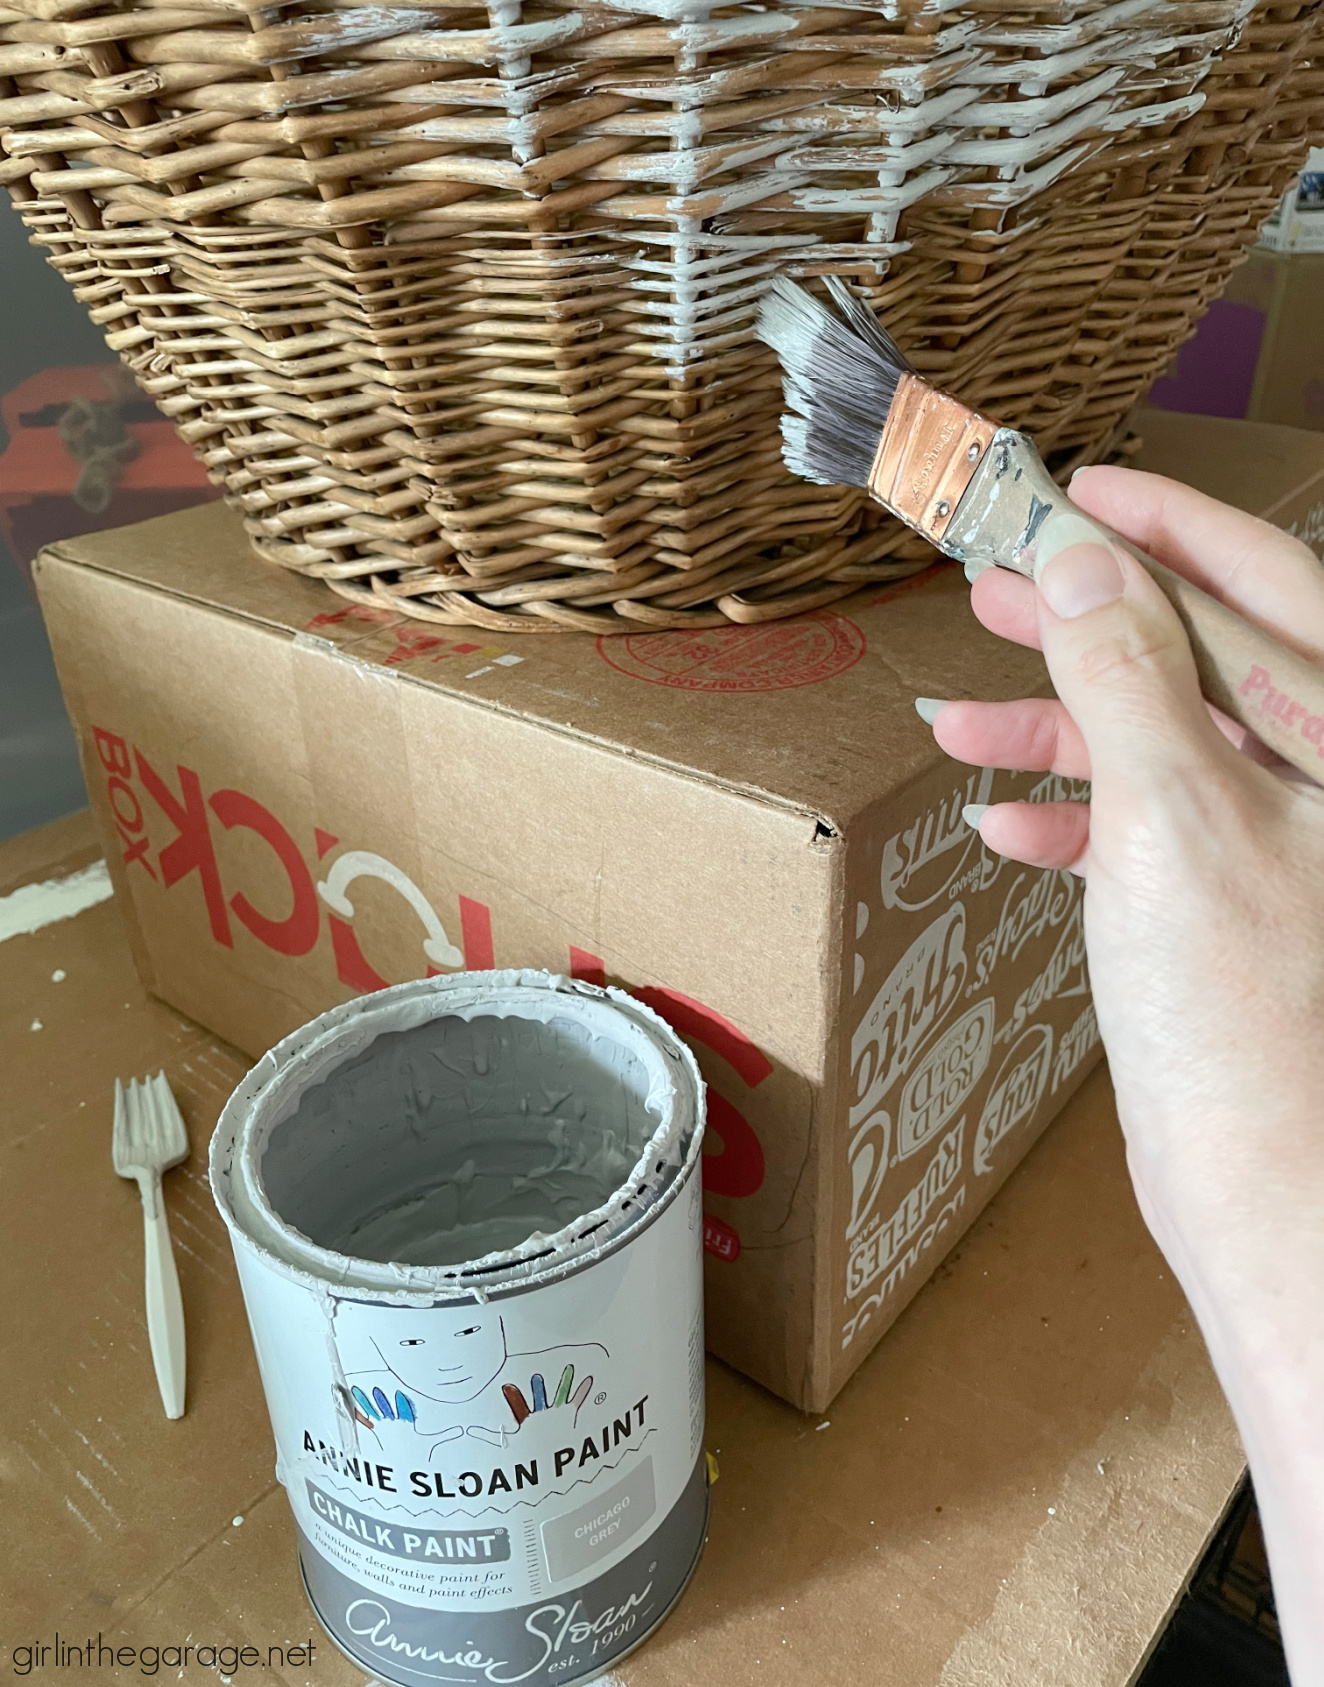 Paint a wicker basket with Chalk Paint - Girl in the Garage